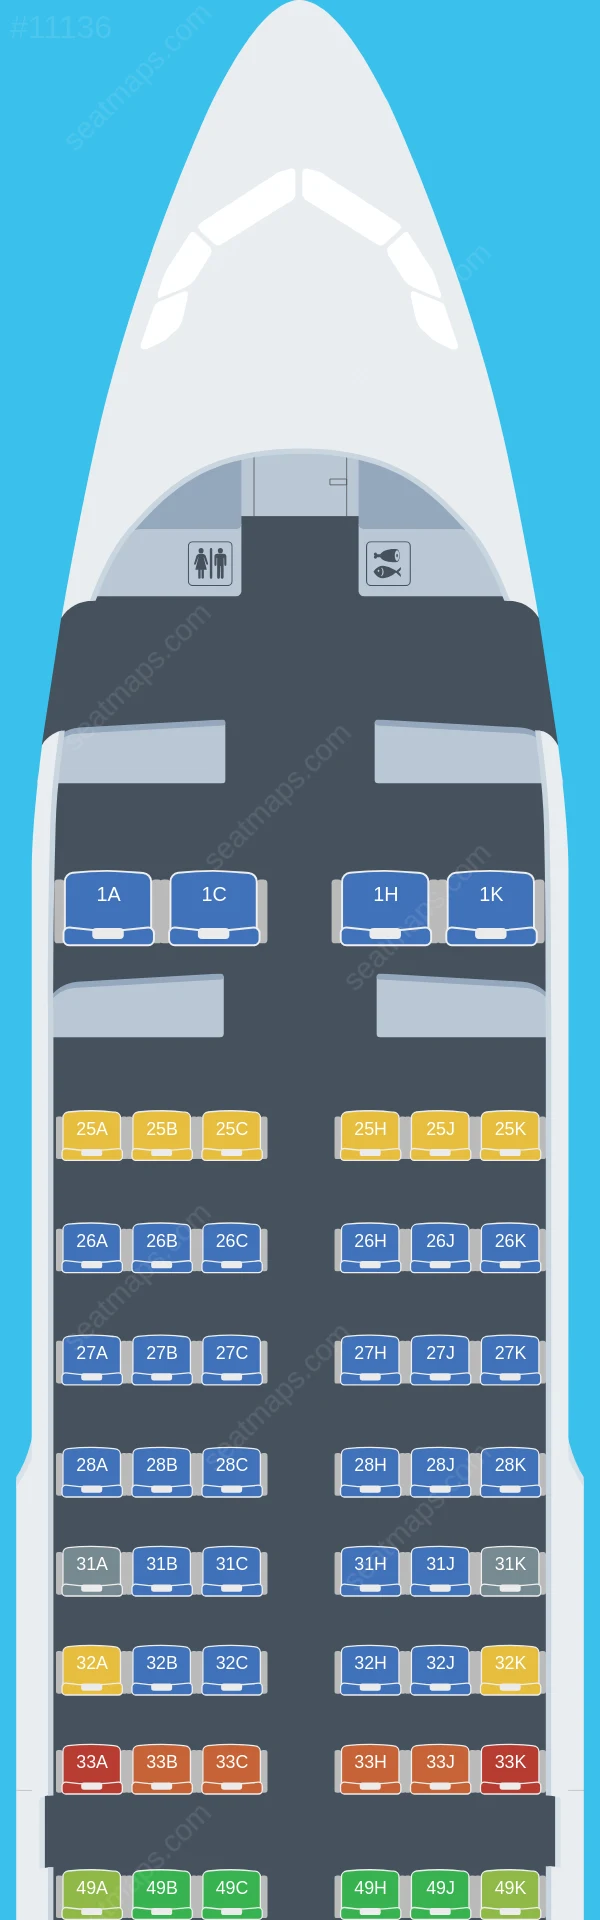 China Southern Airbus A319neo seatmap preview